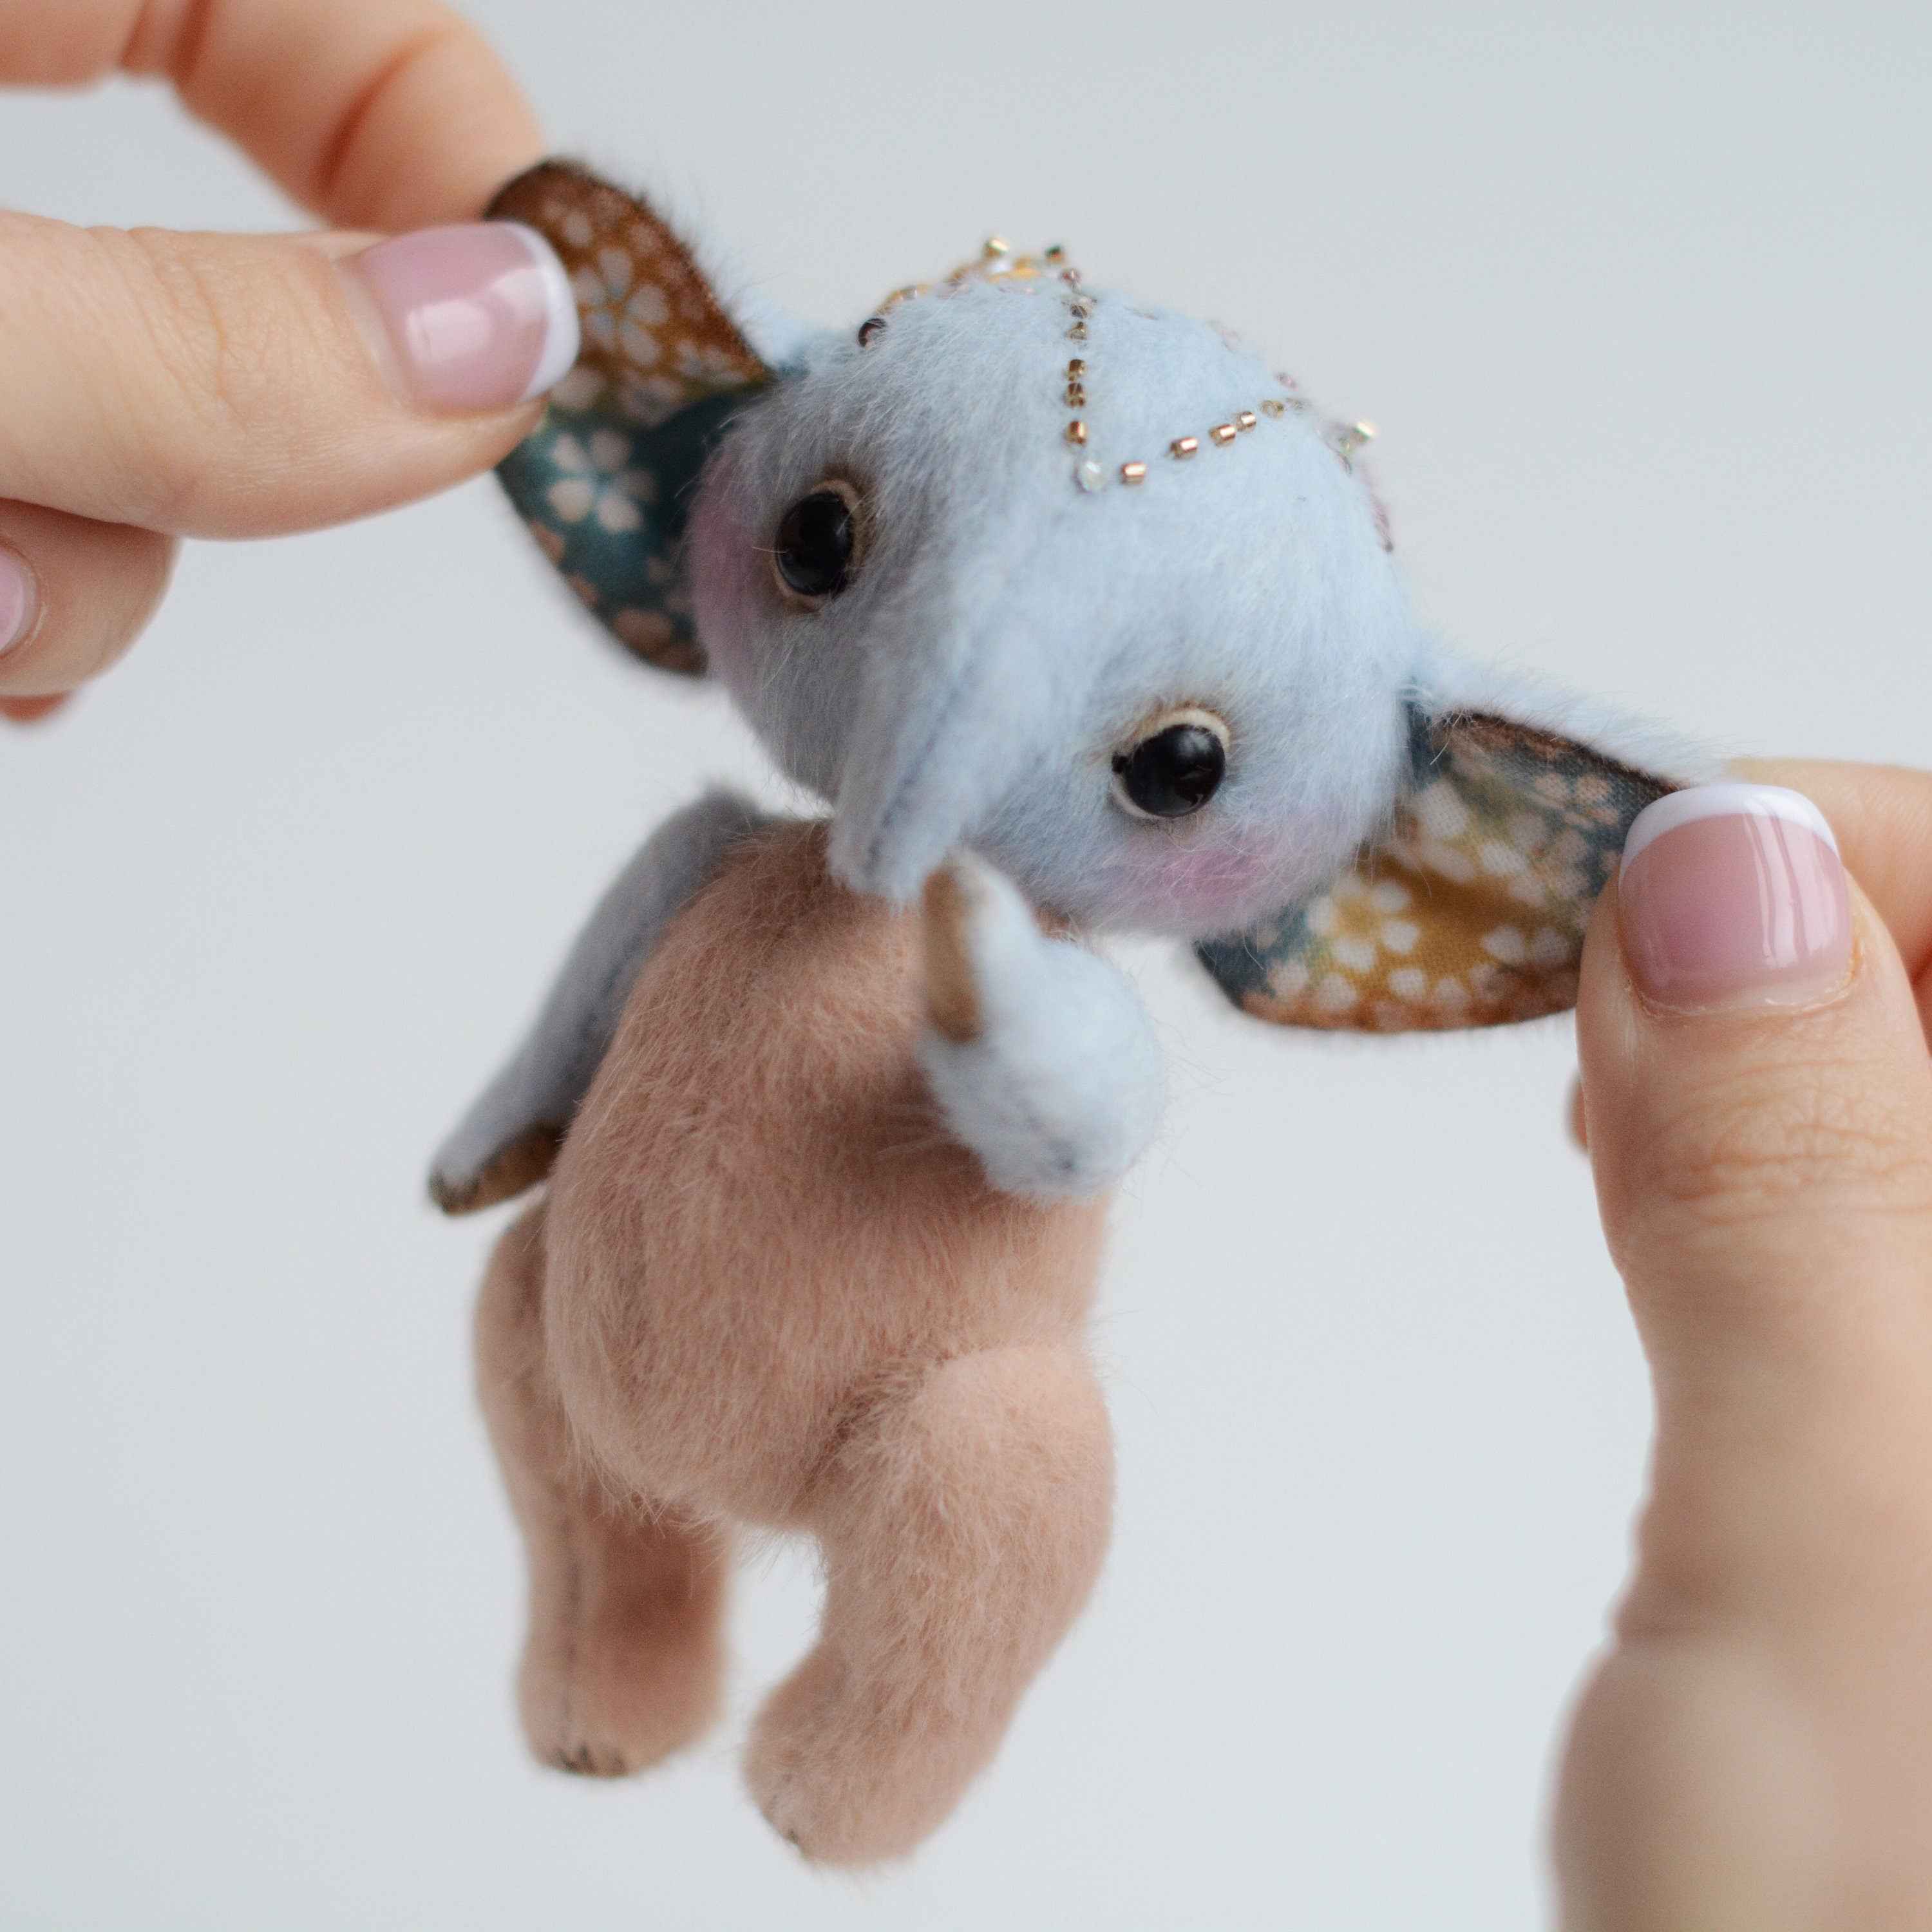 Miniature Teddy Elephant PATTERN PDF text instructions, easy teddy toy pattern for beginners, how to sew elephant stuffed toy